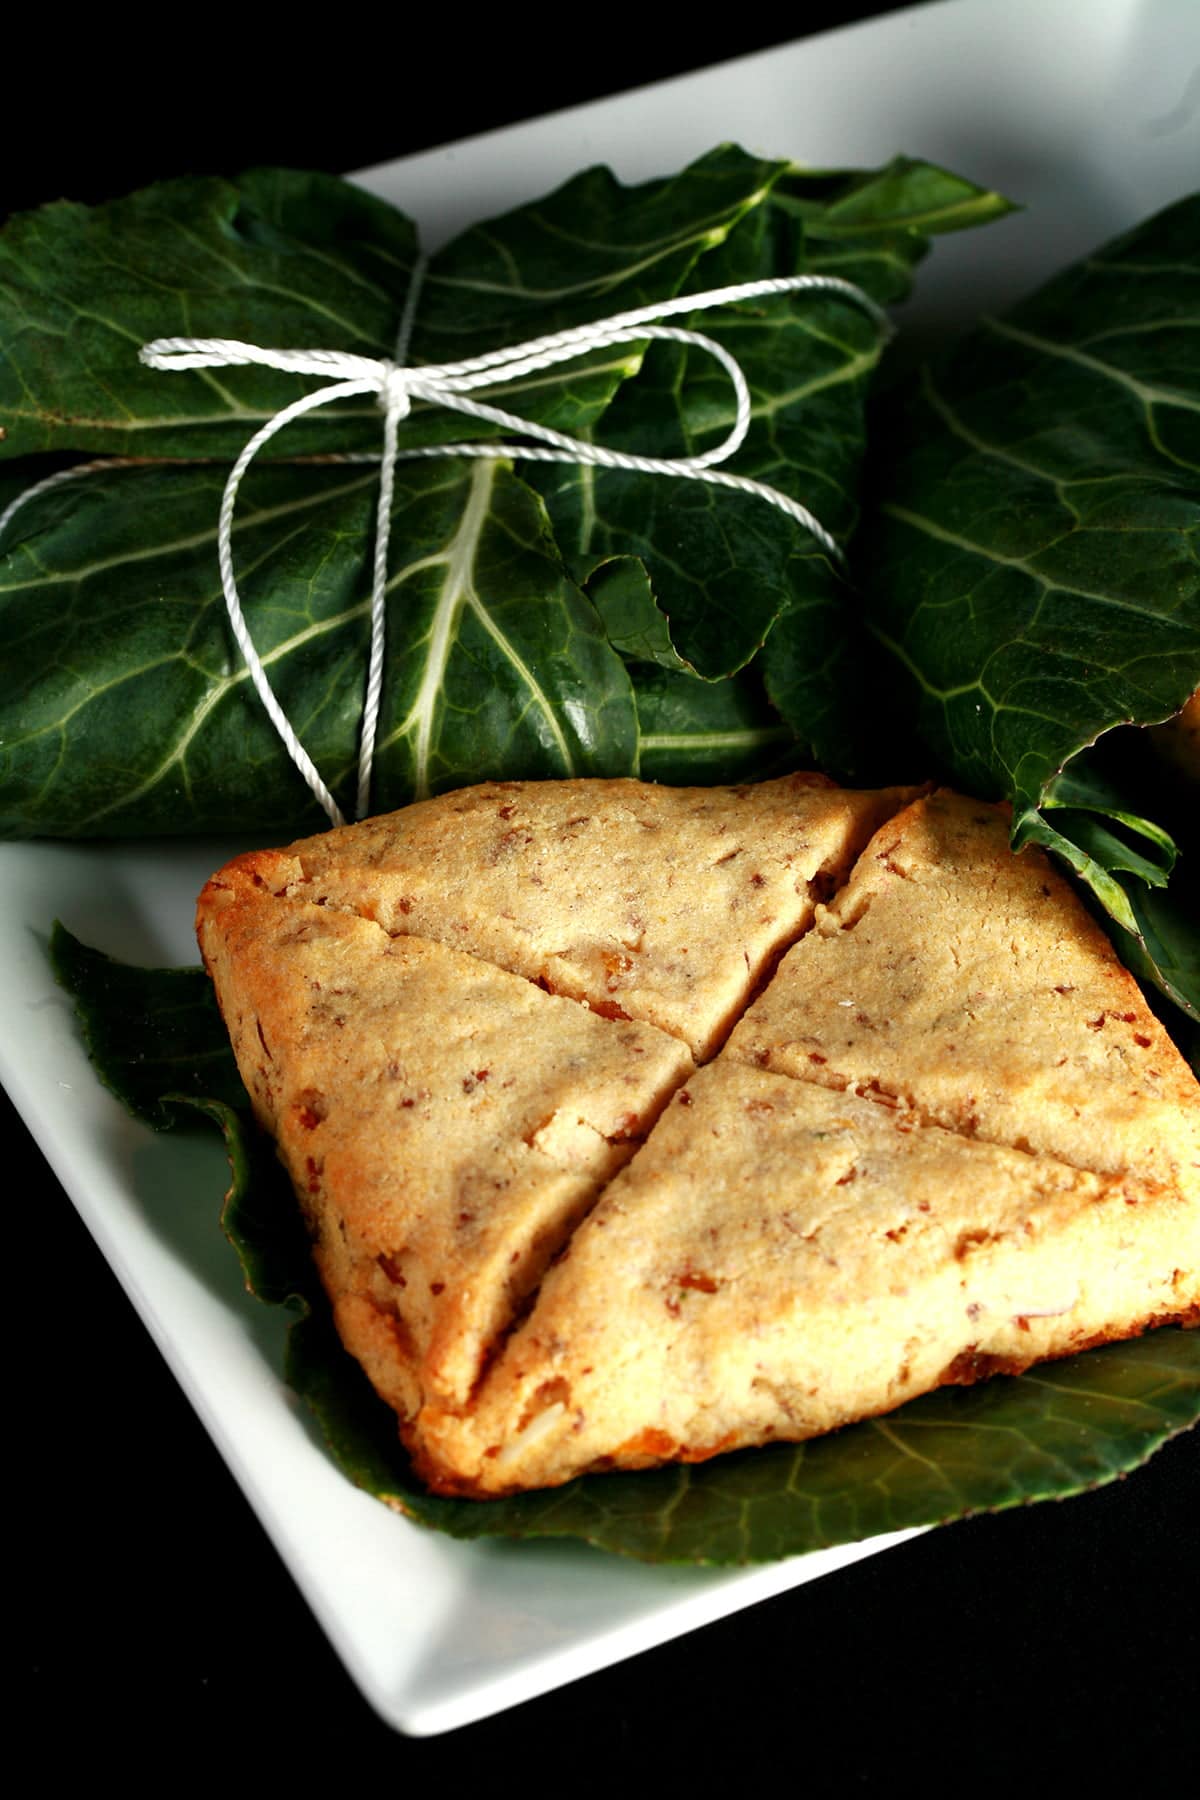 A square white plate displays 3 pieces of Lembas bread. Two of the square biscuits - each marked with an X cut - are unwrapped, while the 3 is still neatly packaged in a large leaf, and tied with twine.